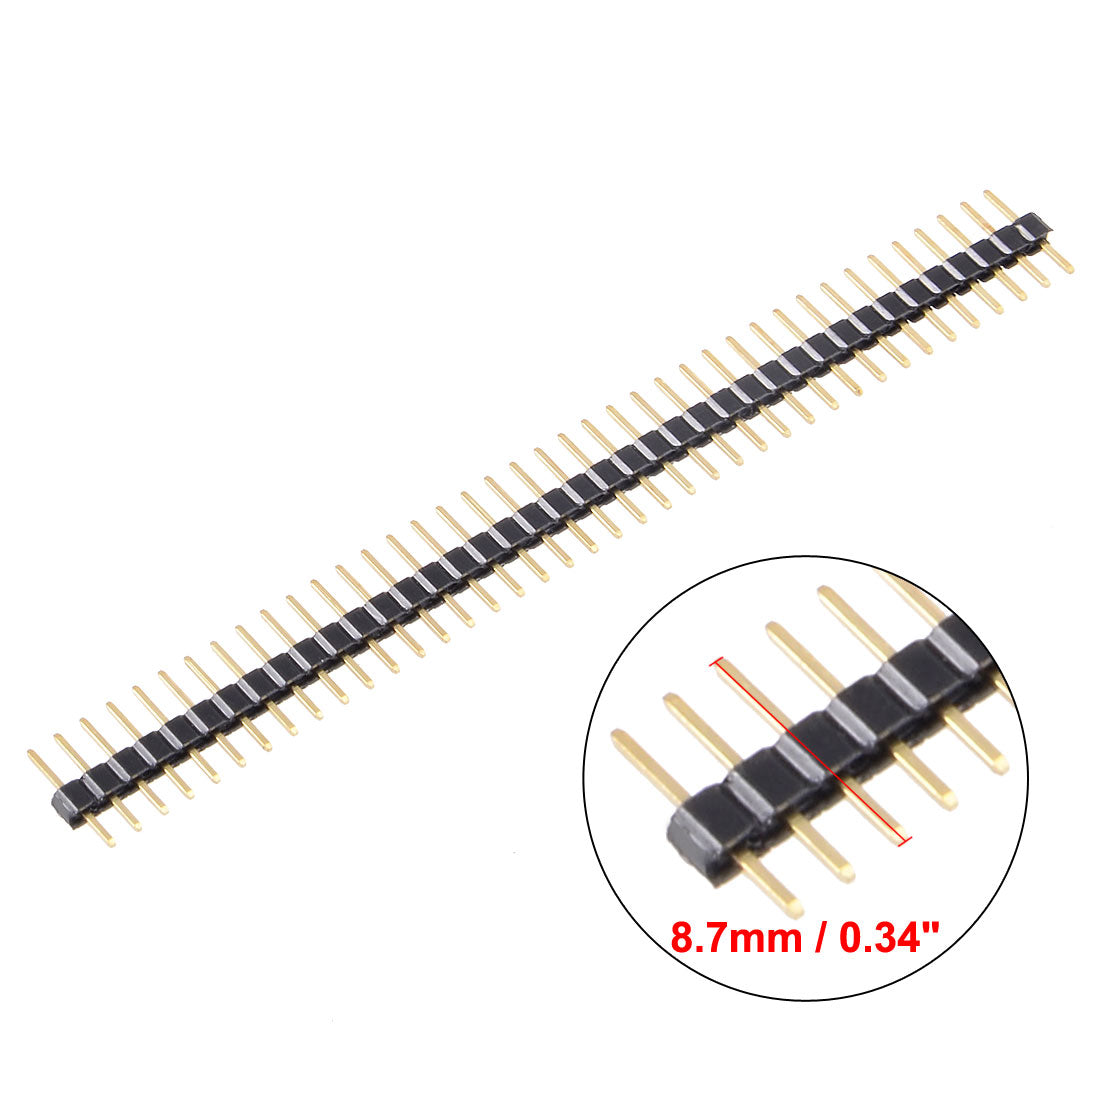 uxcell Uxcell 10Pcs 2mm Pitch 40P Single Row Straight Connector Pin Header Strip for Arduino Prototype Shield